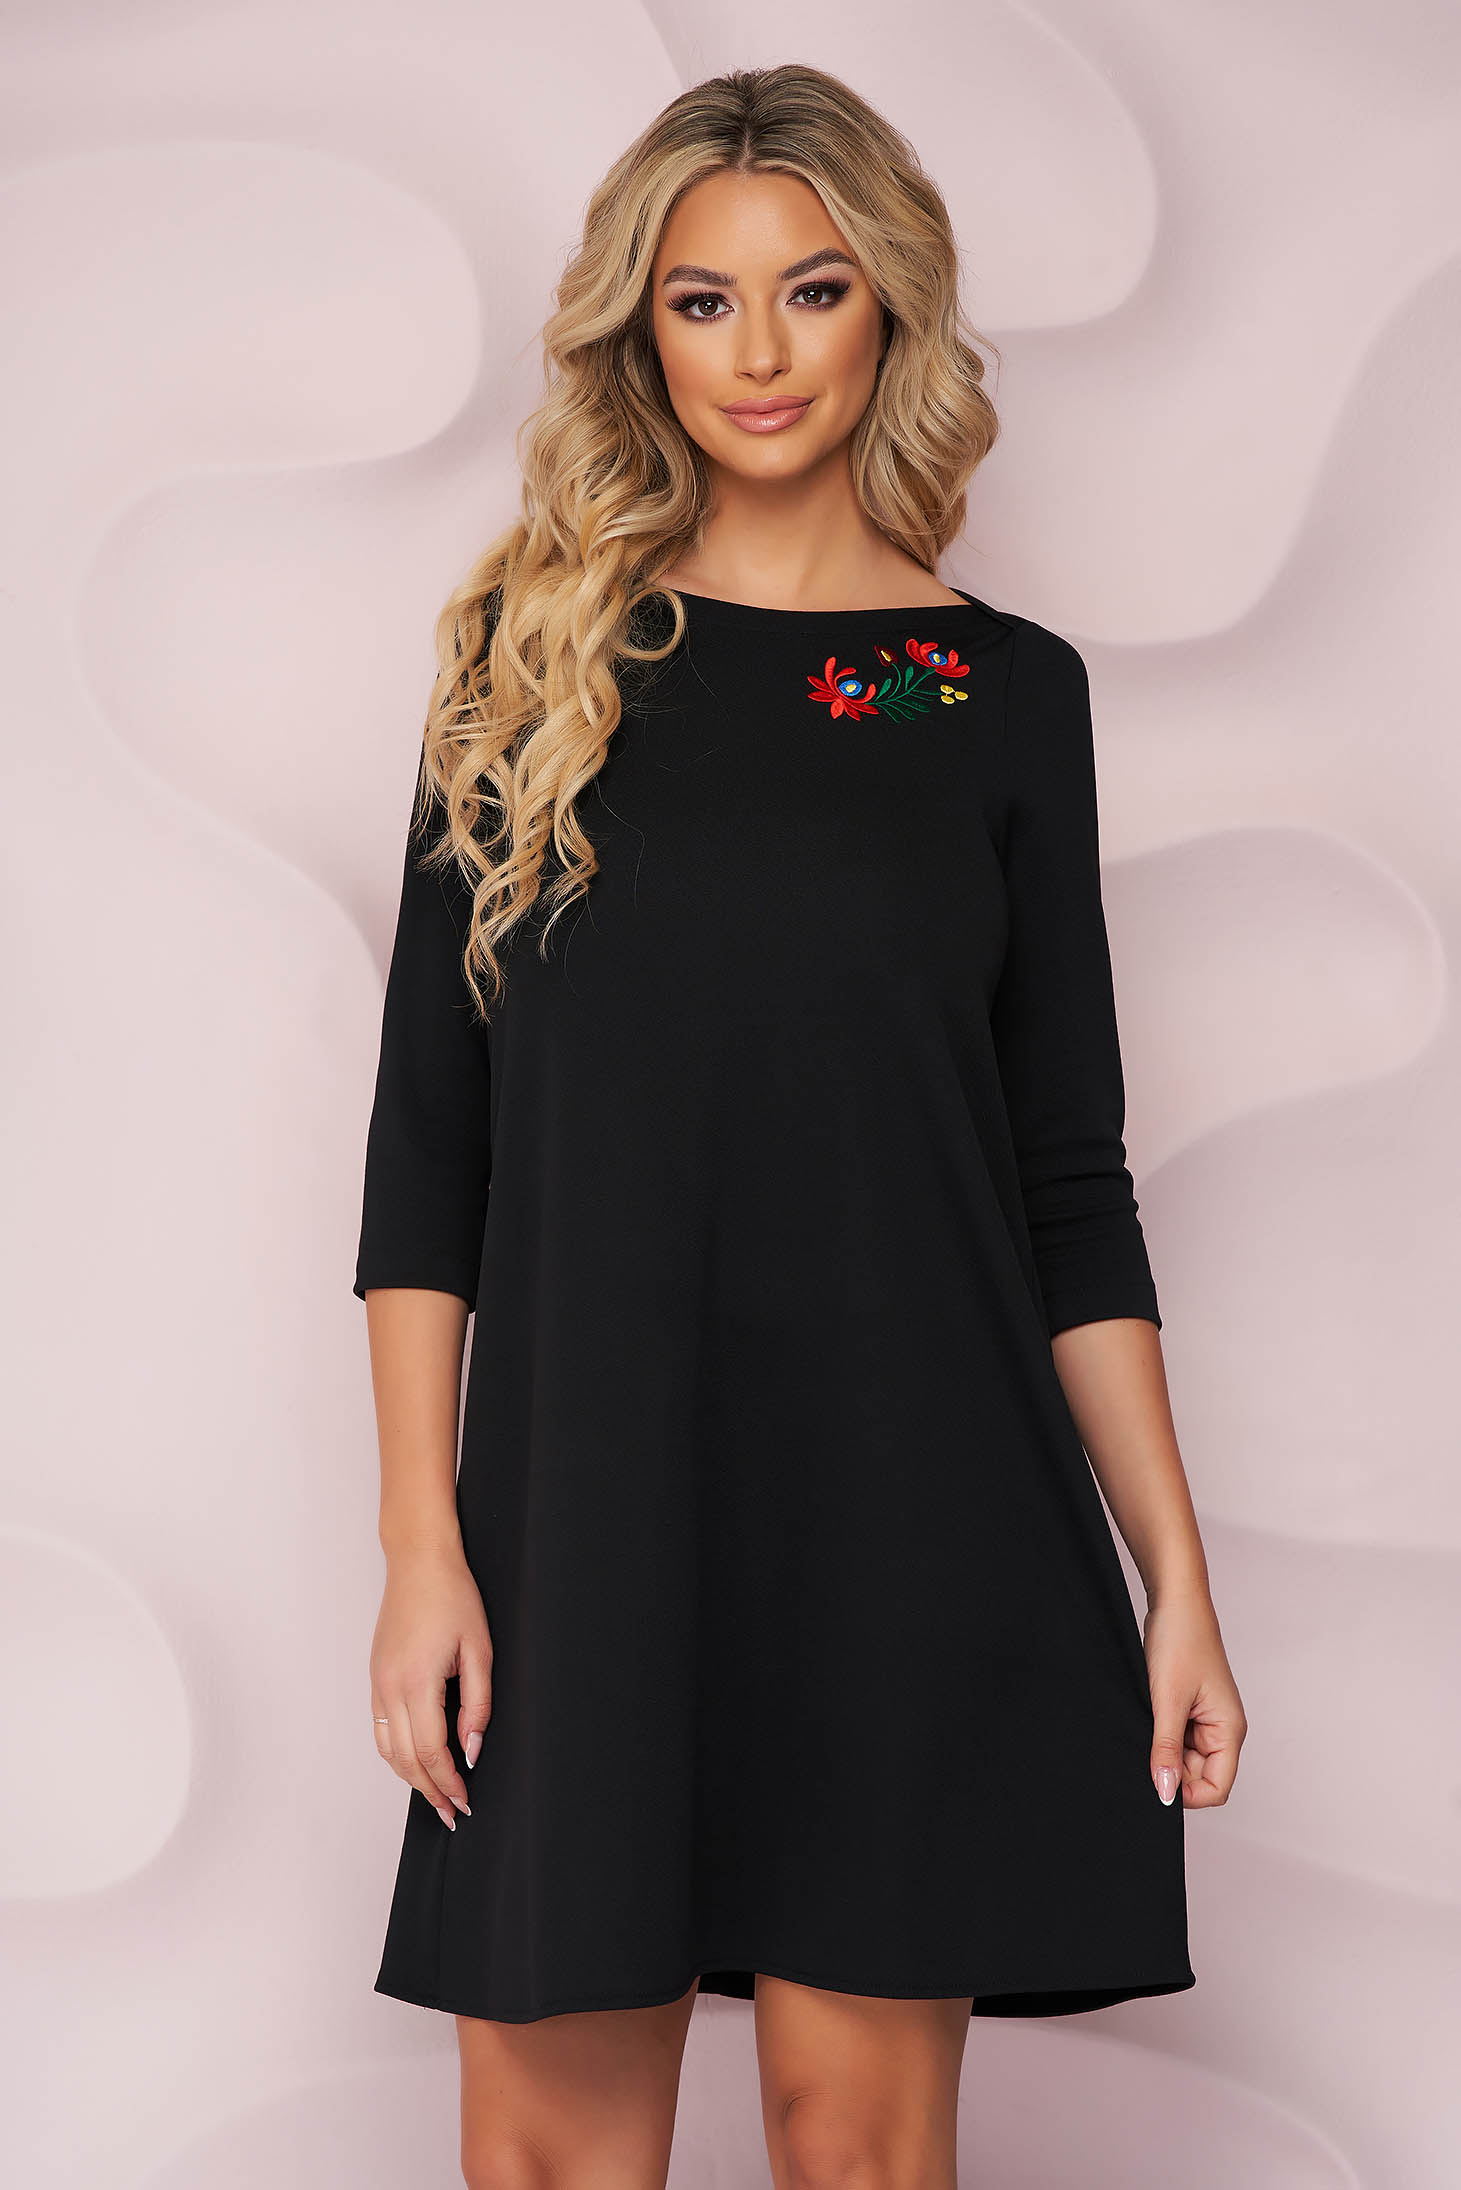 Rochie din crep scurta cu croi larg si broderie florala unica - StarShinerS